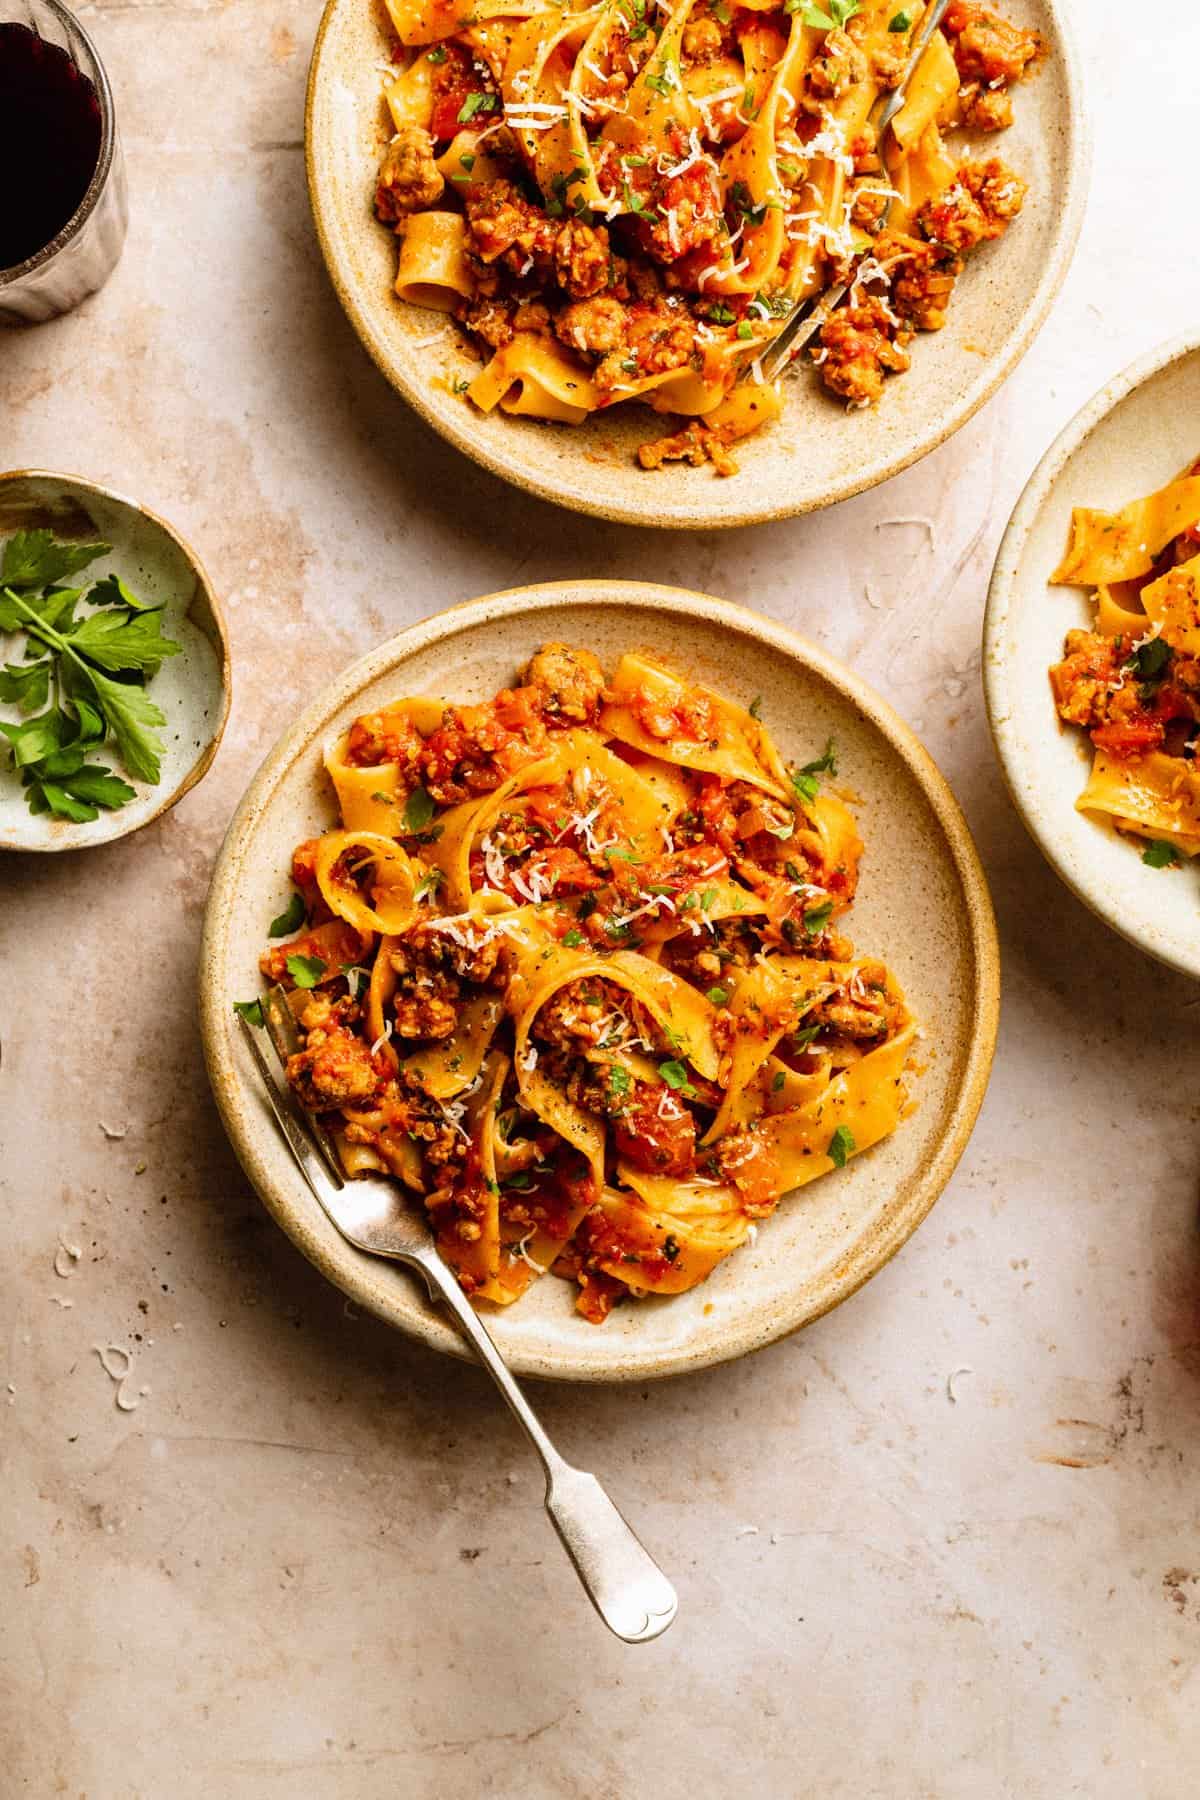 Sausage ragu with pappardelle in bowls, a fork on the side of a bowl and small dish with herbs with a glass of red wine.